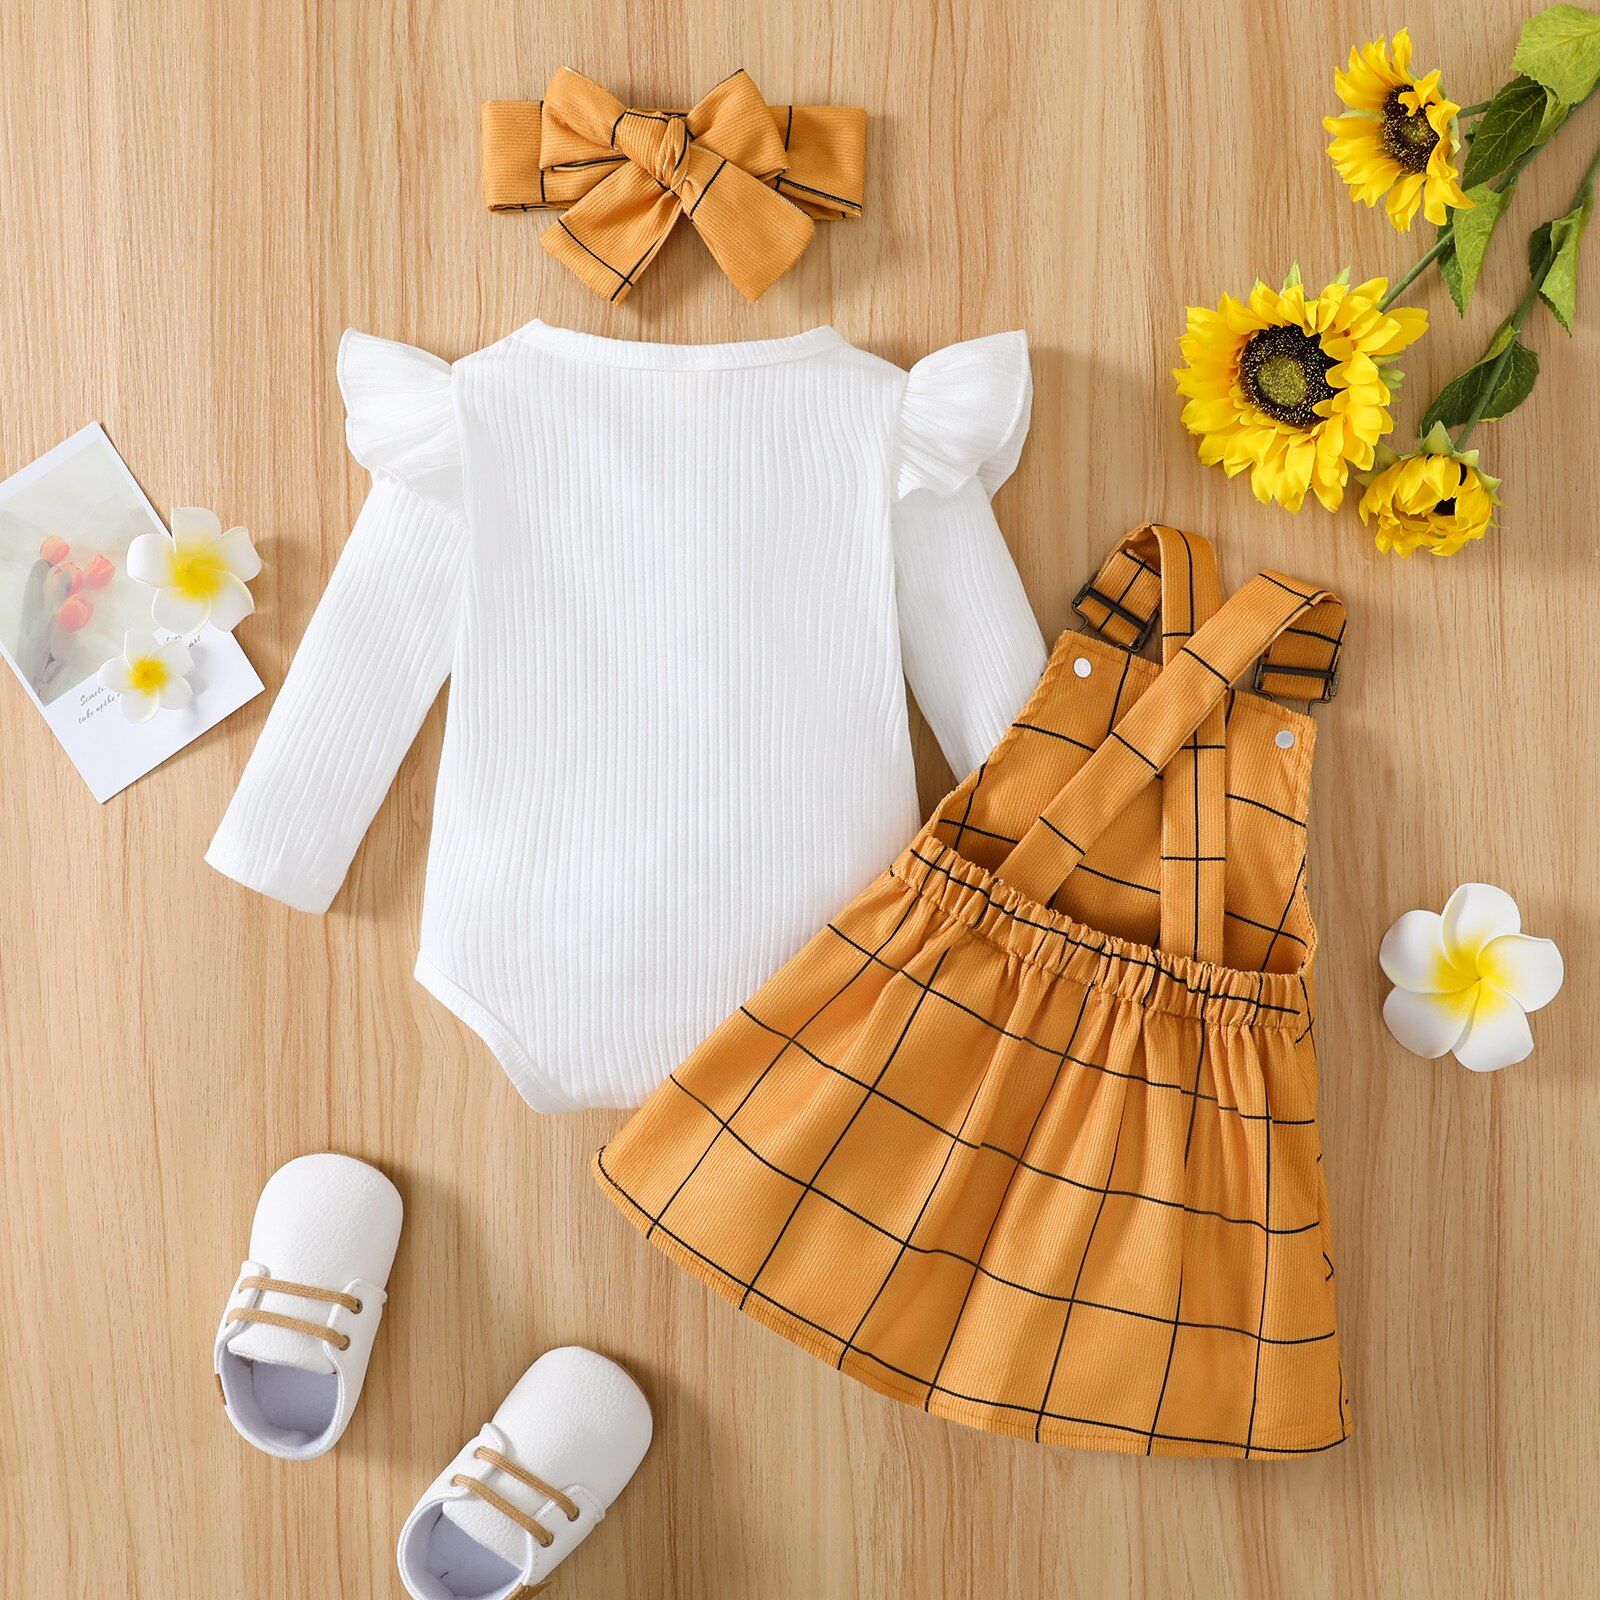 Autumn-Fashion-Toddler-Baby-Girls-Clothes-Sets-Solid-Knit-Long-Sleeve-Bodysuit-Tops-Plaid-Suspender-Skirt-5